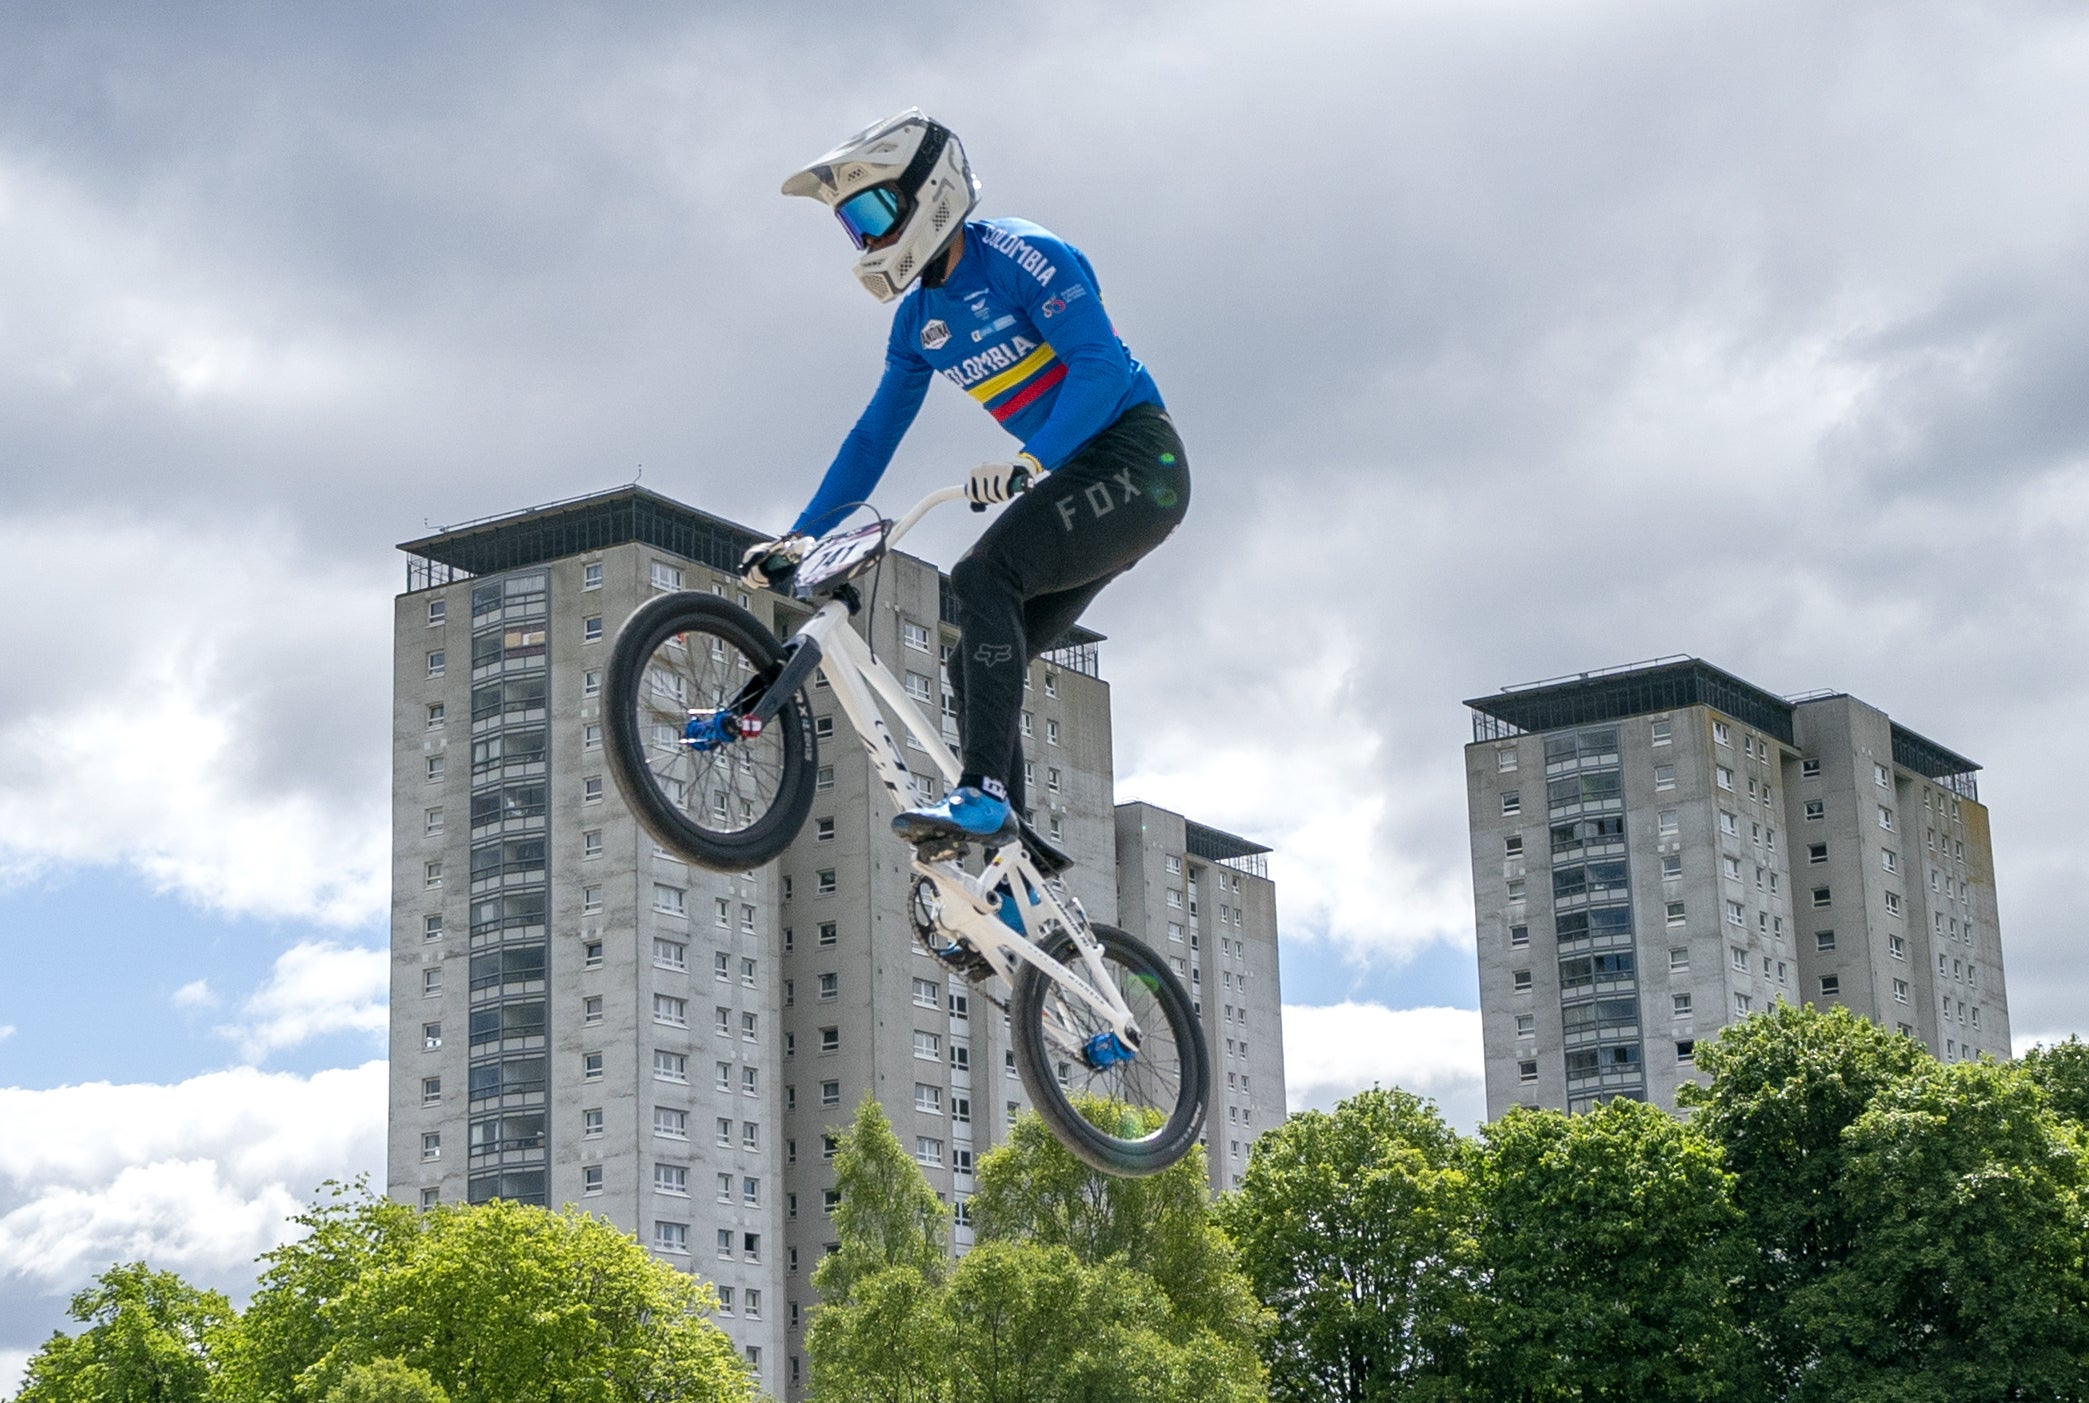 Colombia’s Diego Alejandro Arboleda Ospina in the Men’s Elite race final on day one at the UCI BMX Racing World Cup event in Glasgow (Jane Barlow/PA)